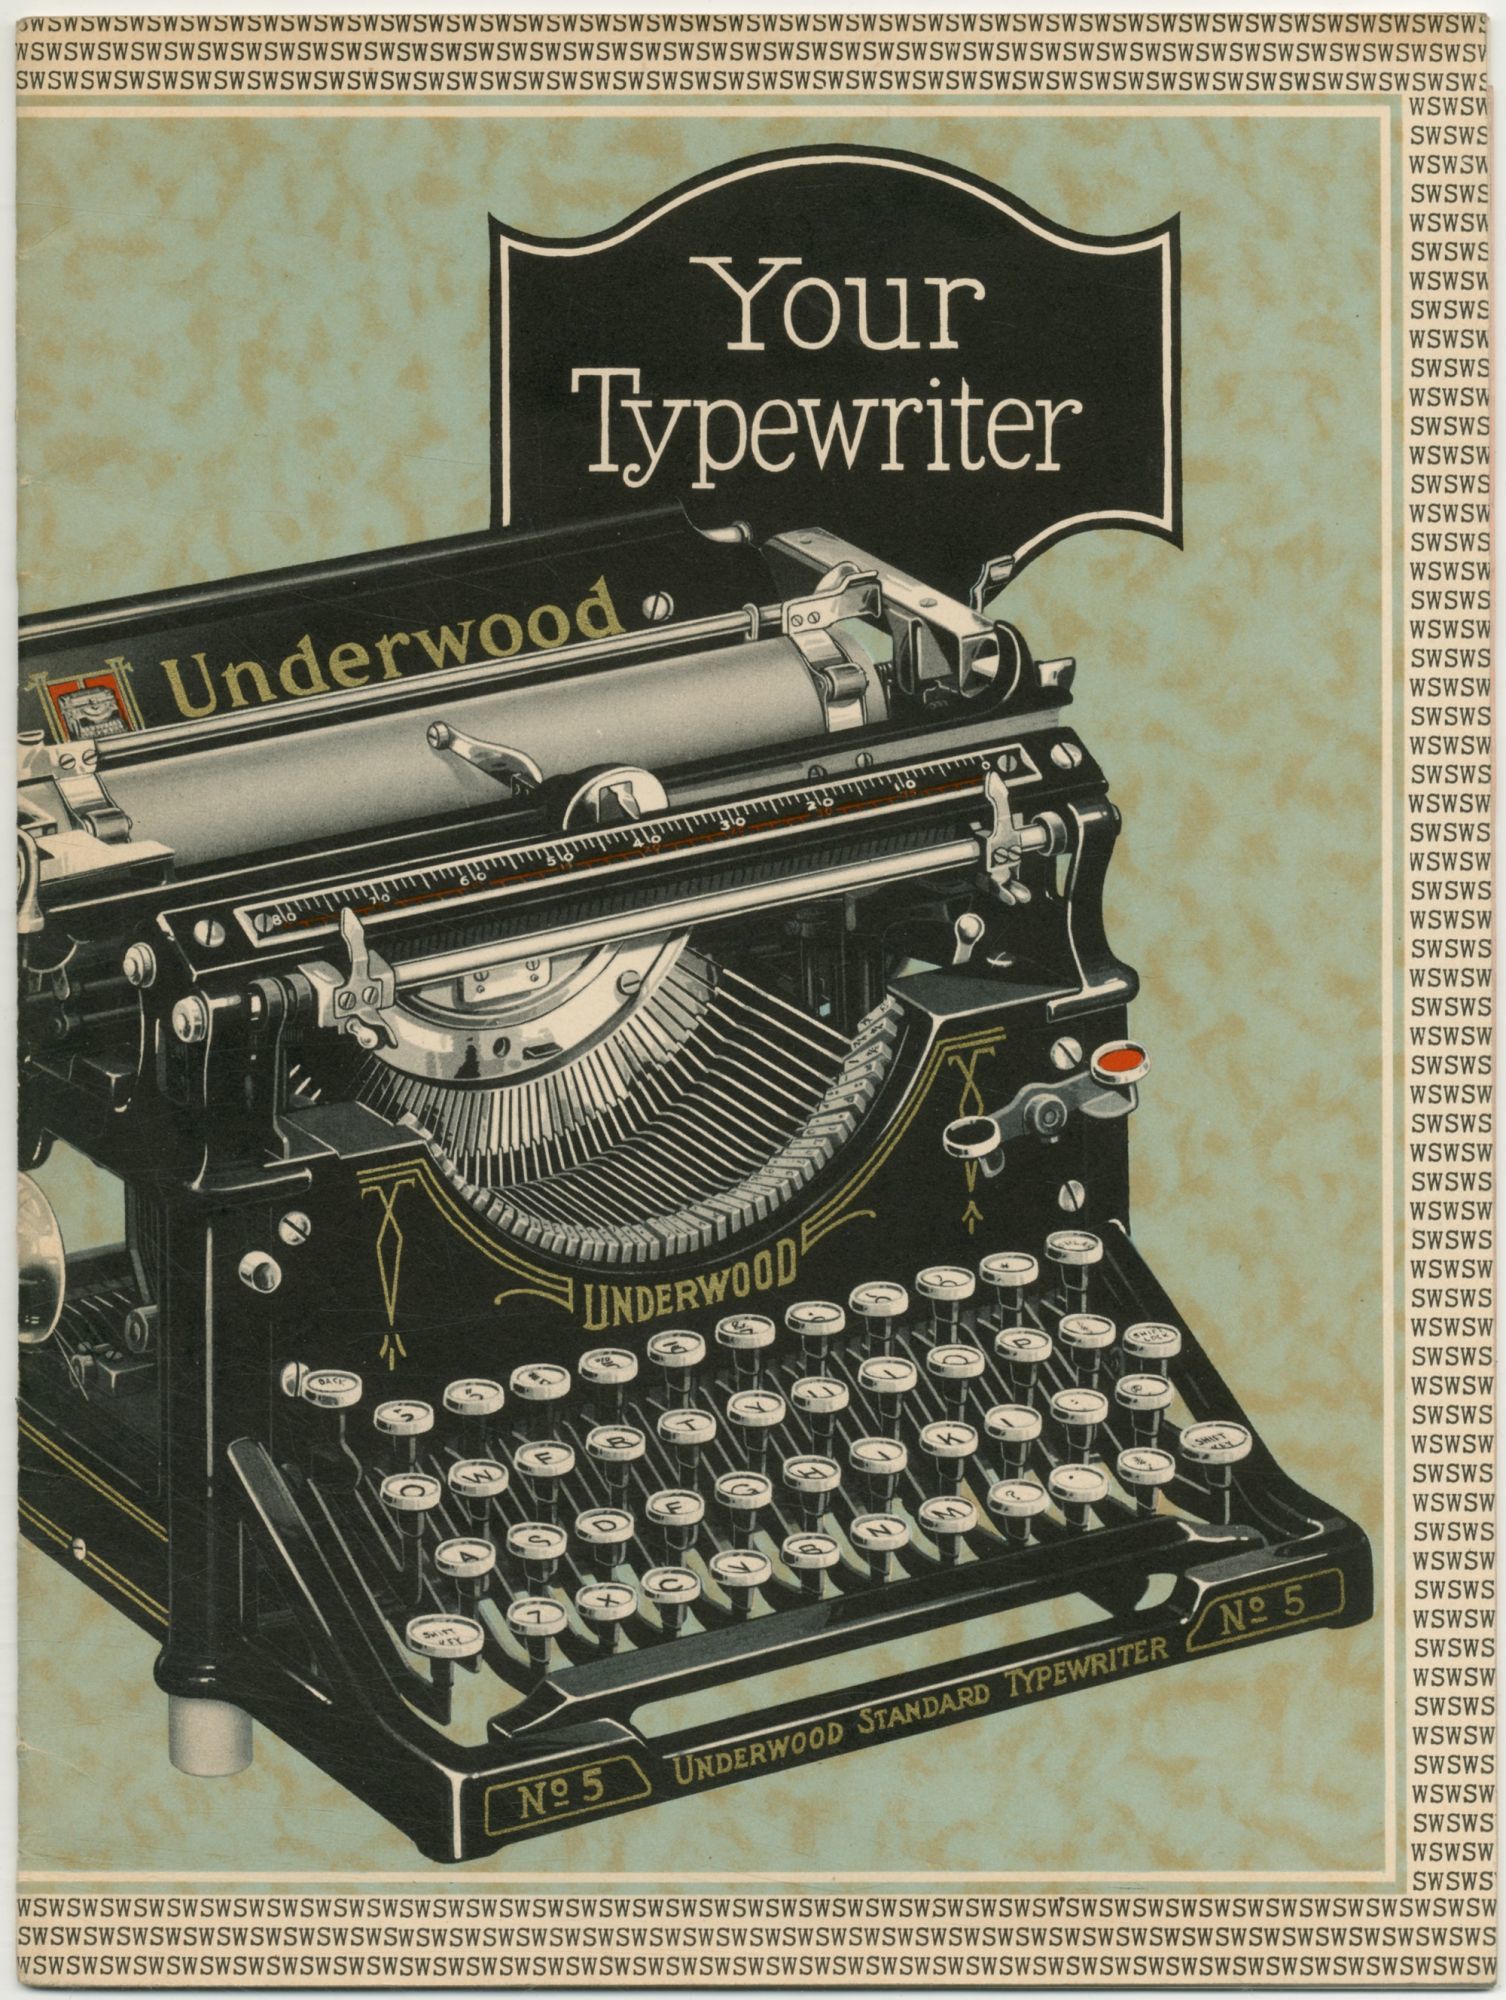 Who uses typewriters anyway?